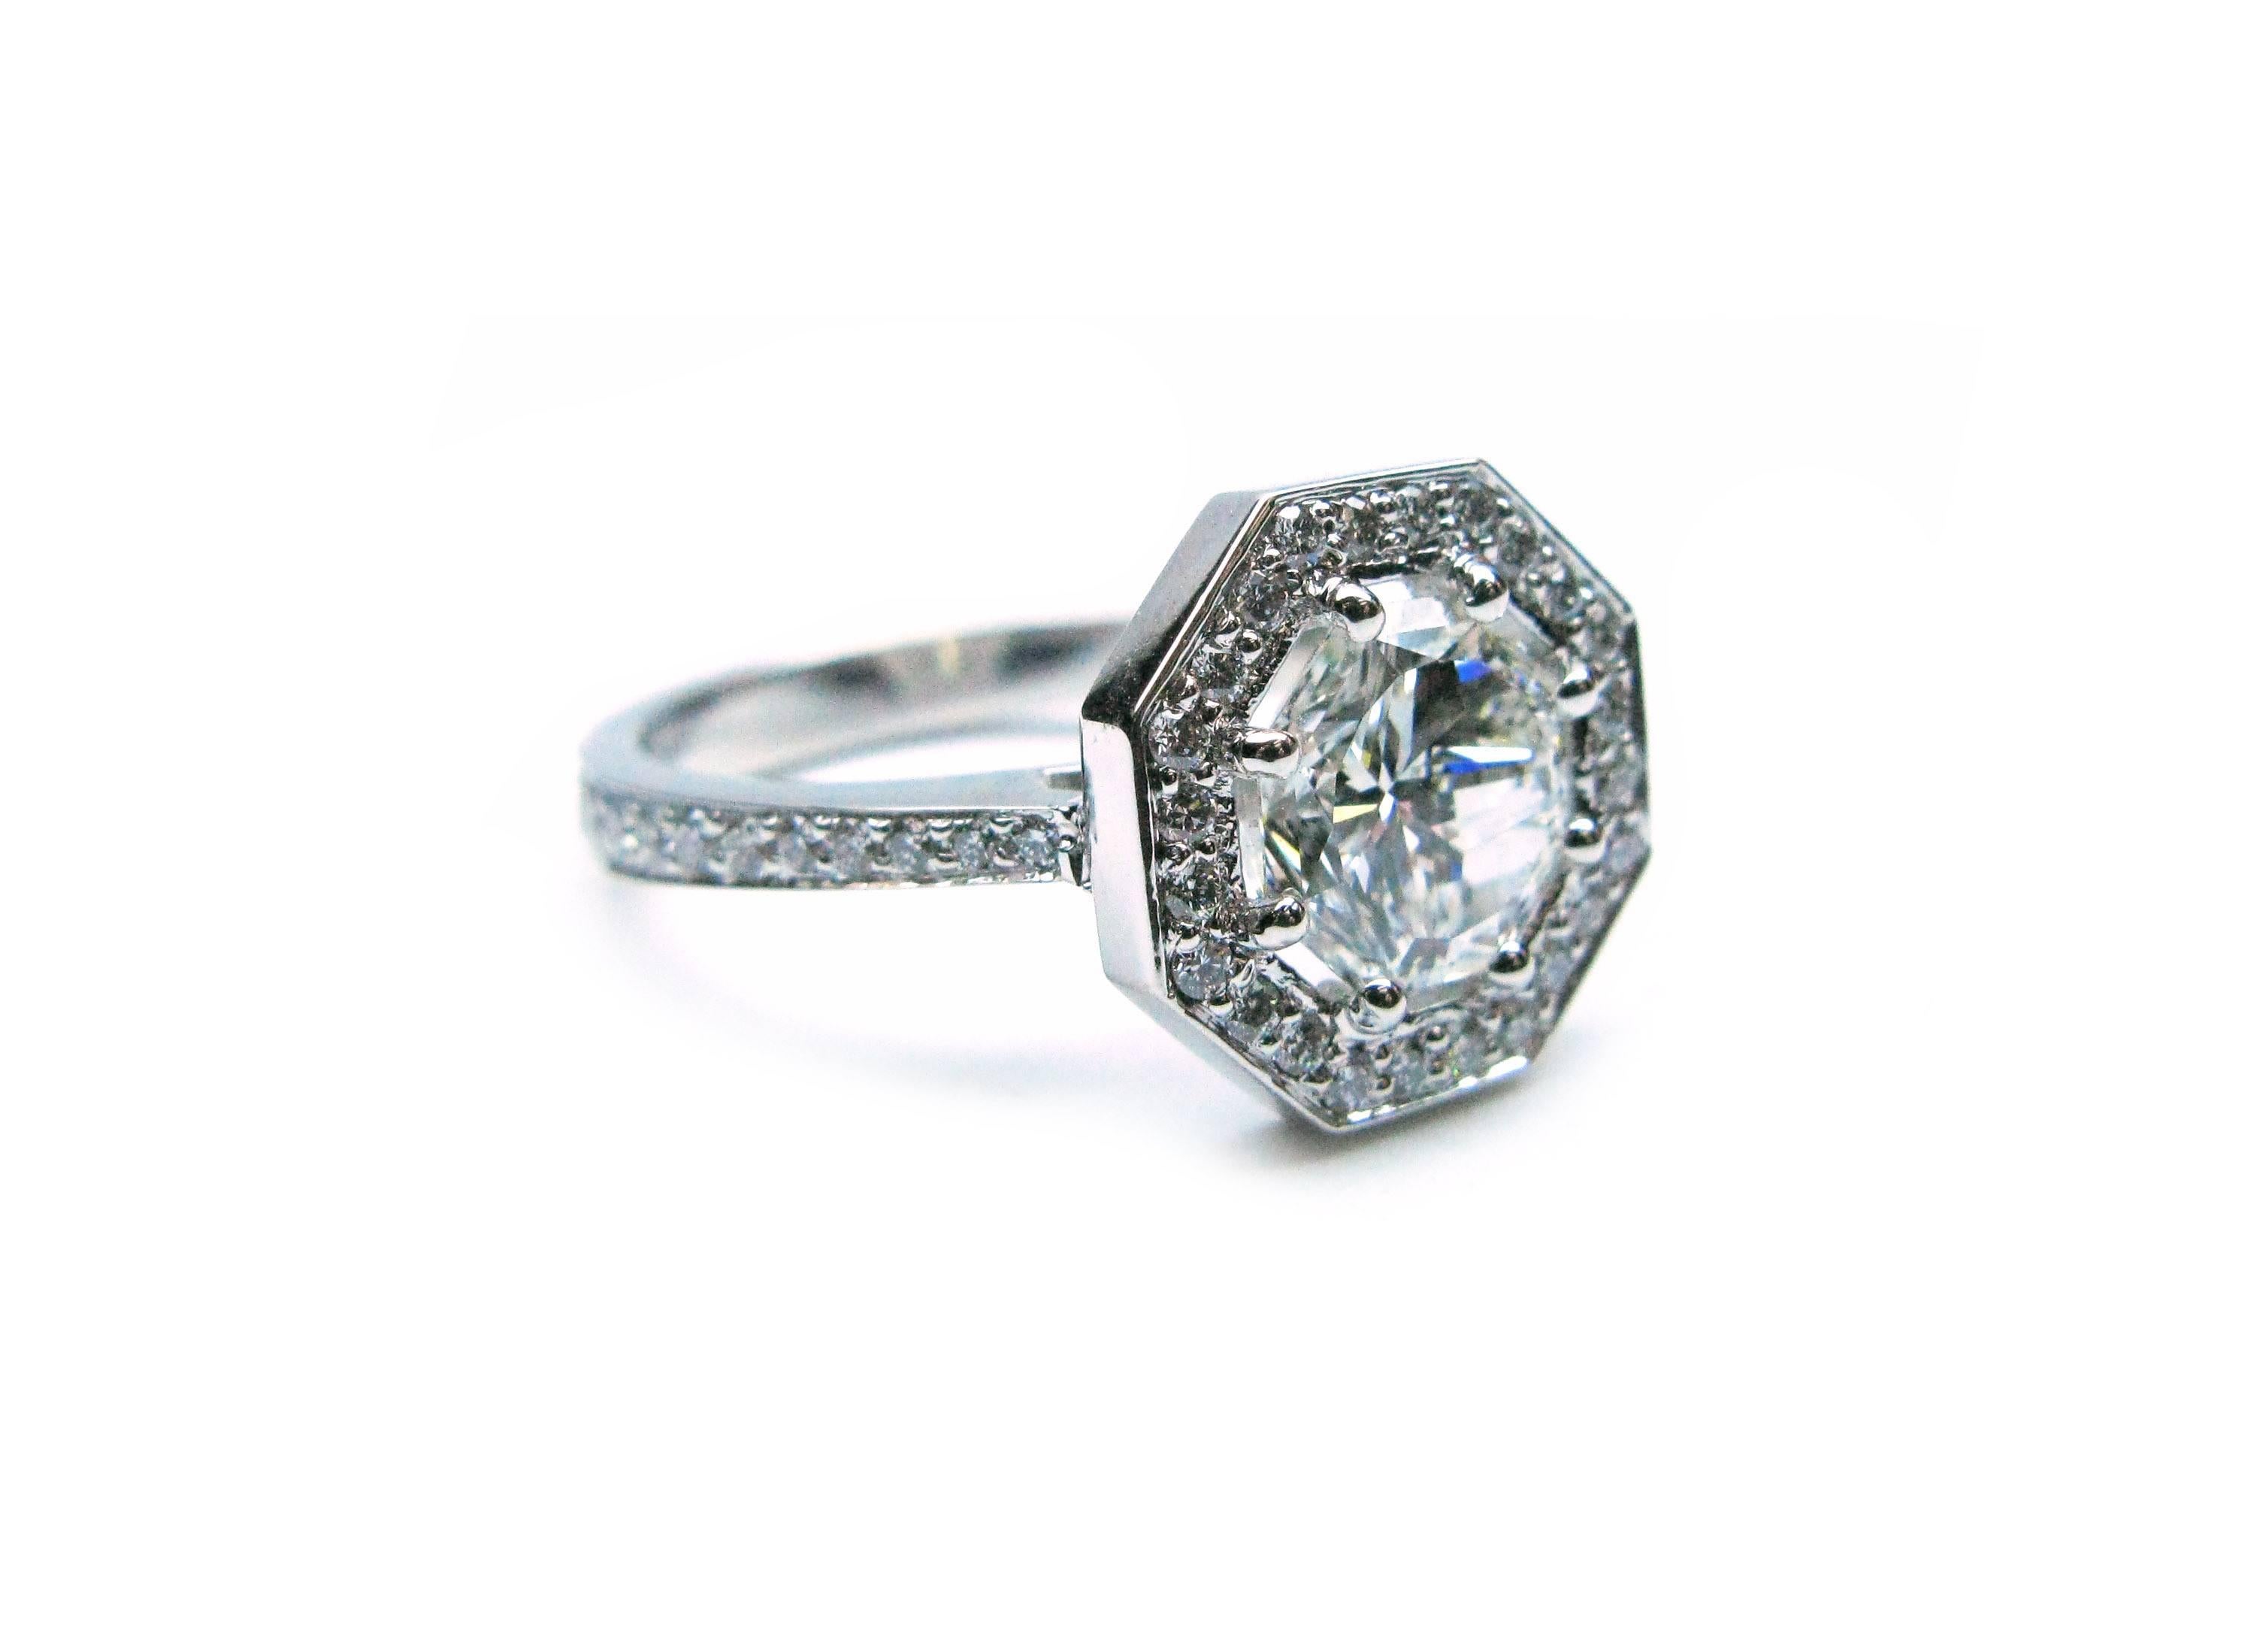 This unique handmade platinum ring features a specially cut GIA certified 1.74 carat, I color, VS1 clarity, Octagonal Modified Brilliant diamond center stone with a pave diamond frame and band weighing a total of 0.39cts. This modern engagement ring